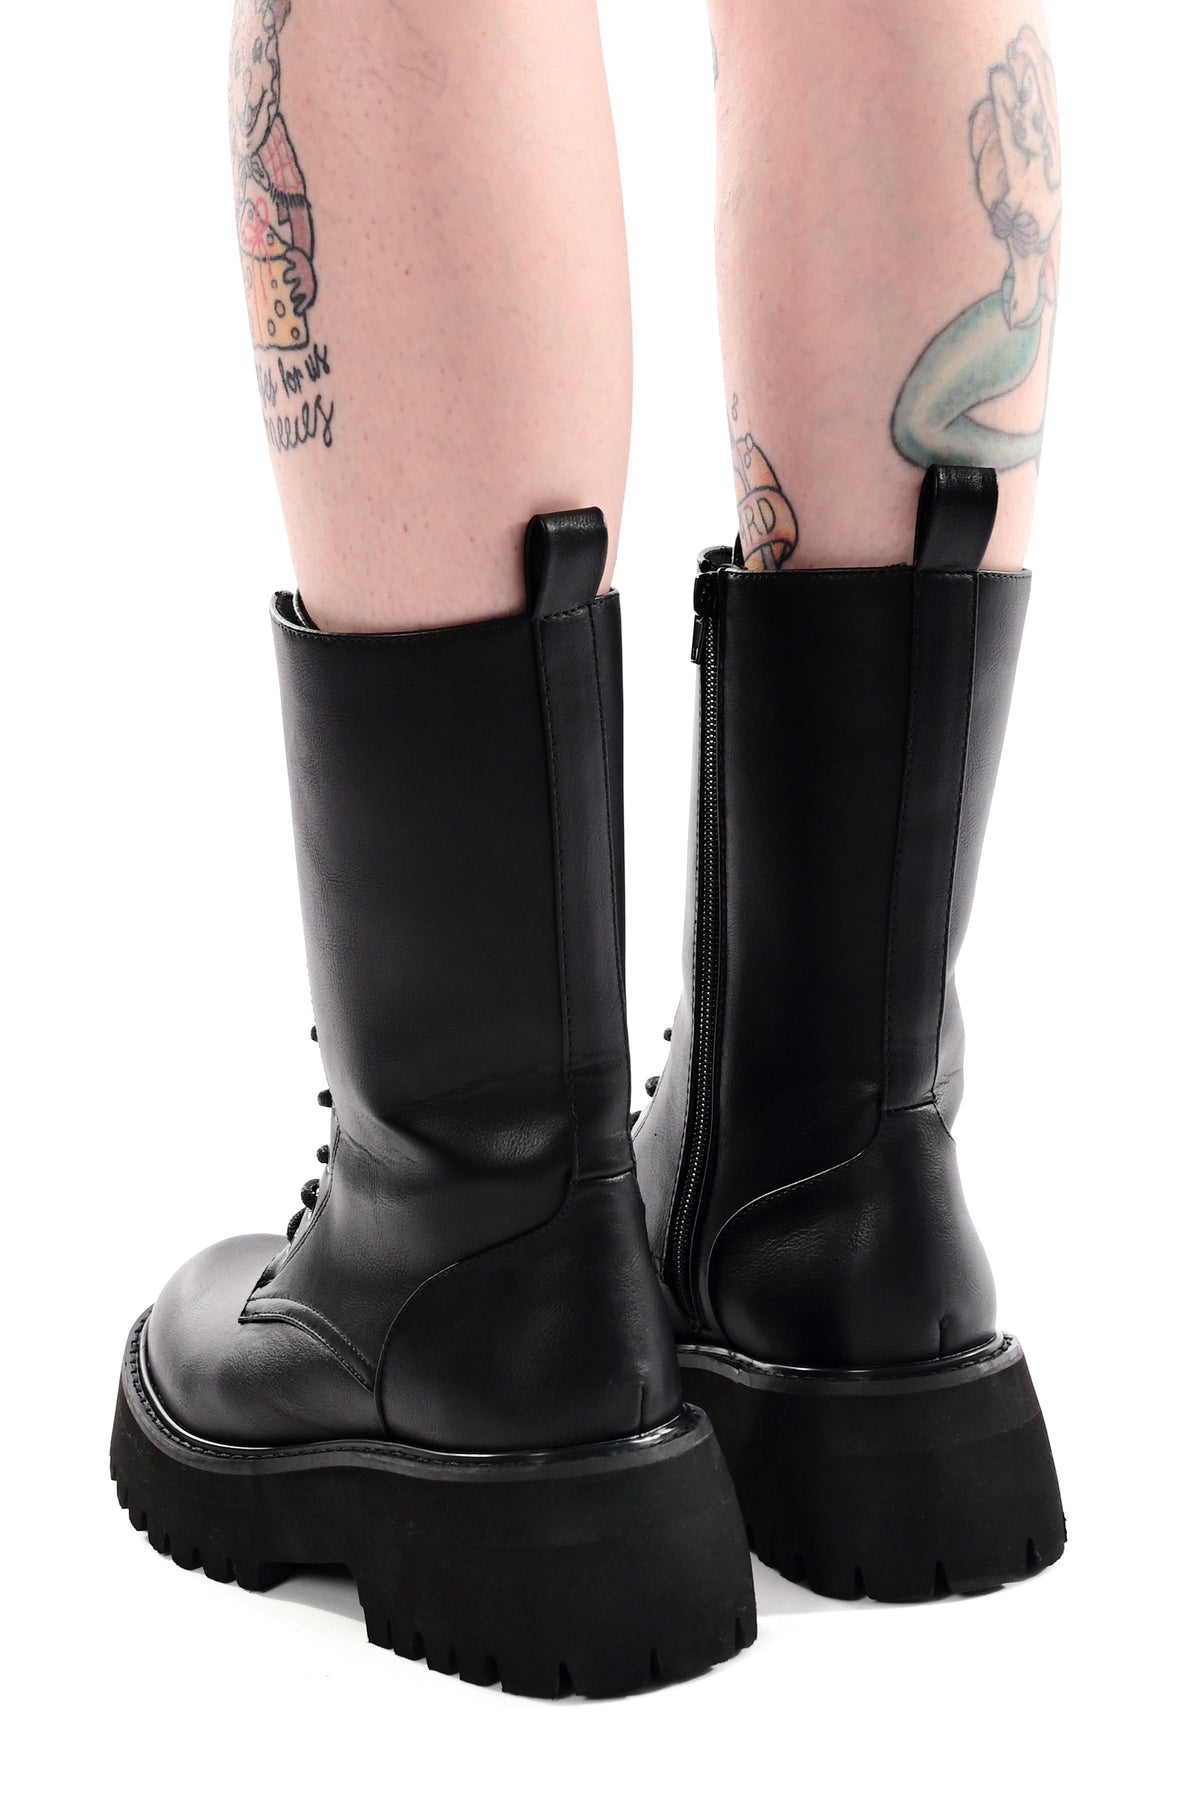 black vegan leather combat boots with lace up front and chunky platform sole